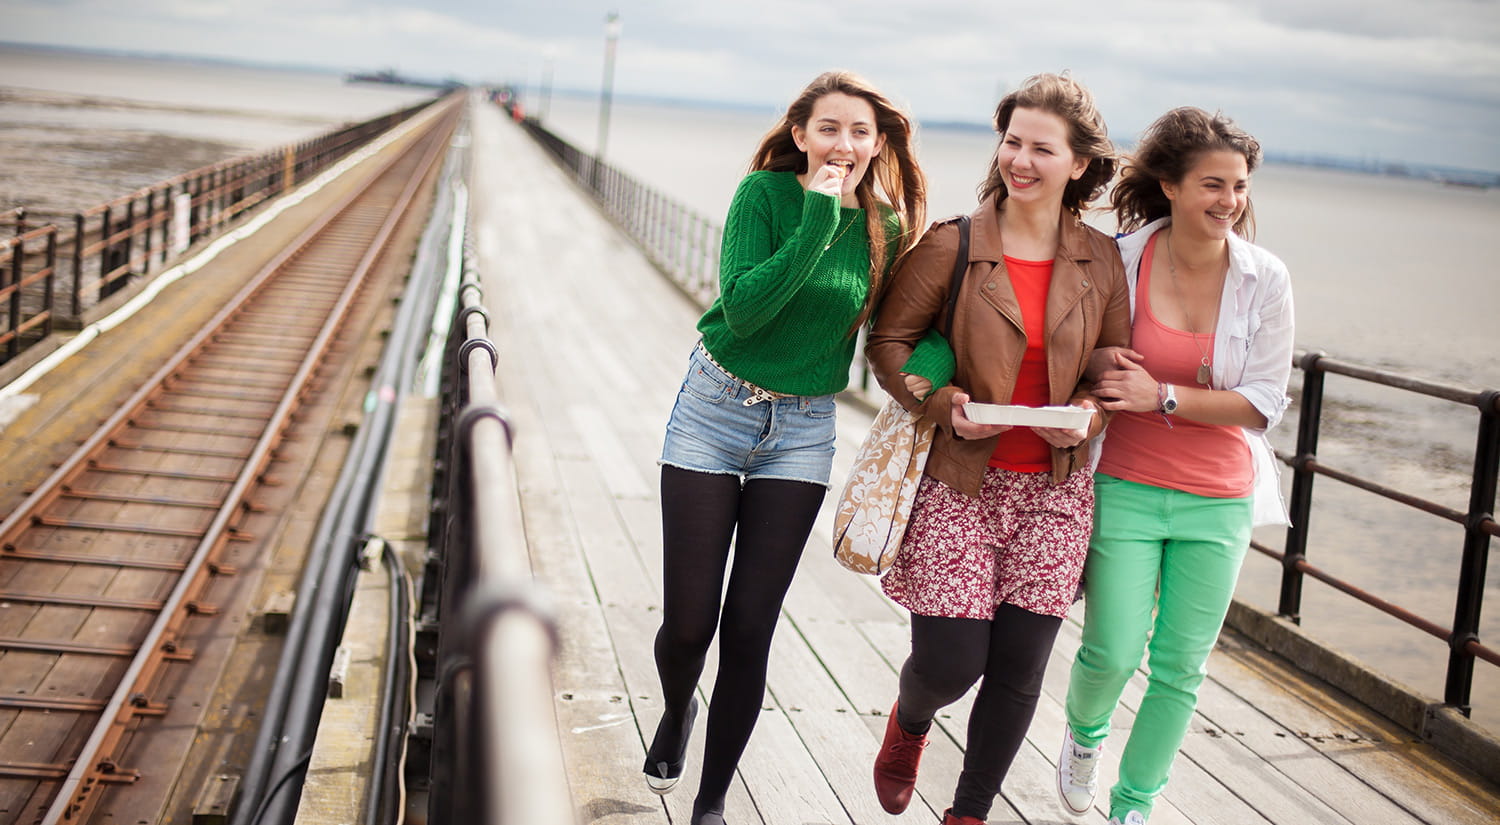 You can take a walk with friends down the world's longest pleasure pier